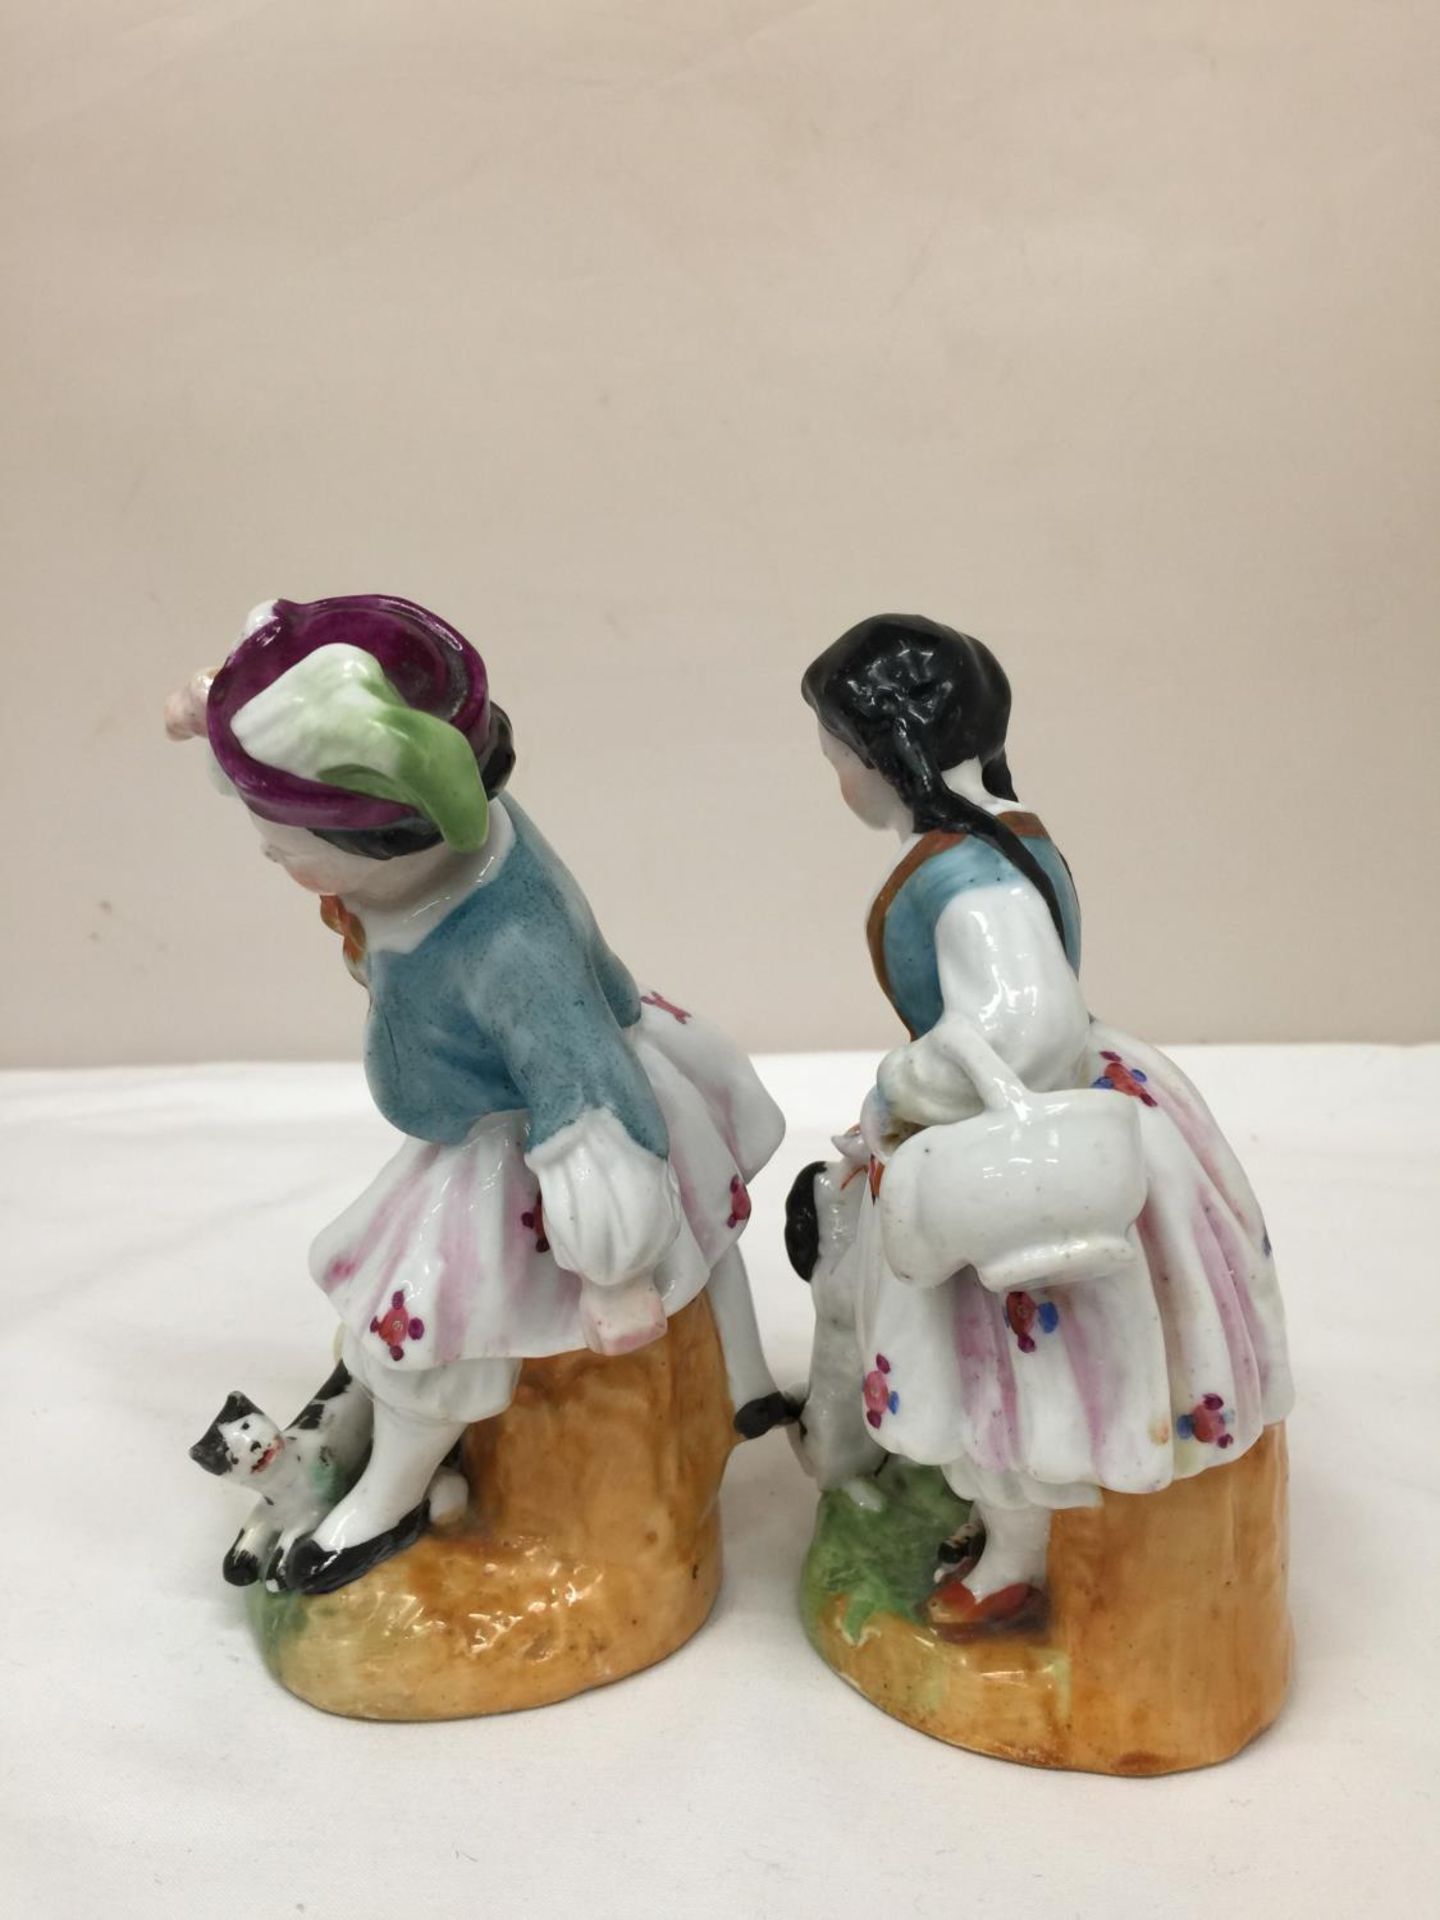 A PAIR OF EARLY STAFFORDSHIRE HARD PASTE PORCELAIN FIGURES OF A BOY AND A GIRL WITH DOGS HEIGHT BOTH - Image 4 of 5